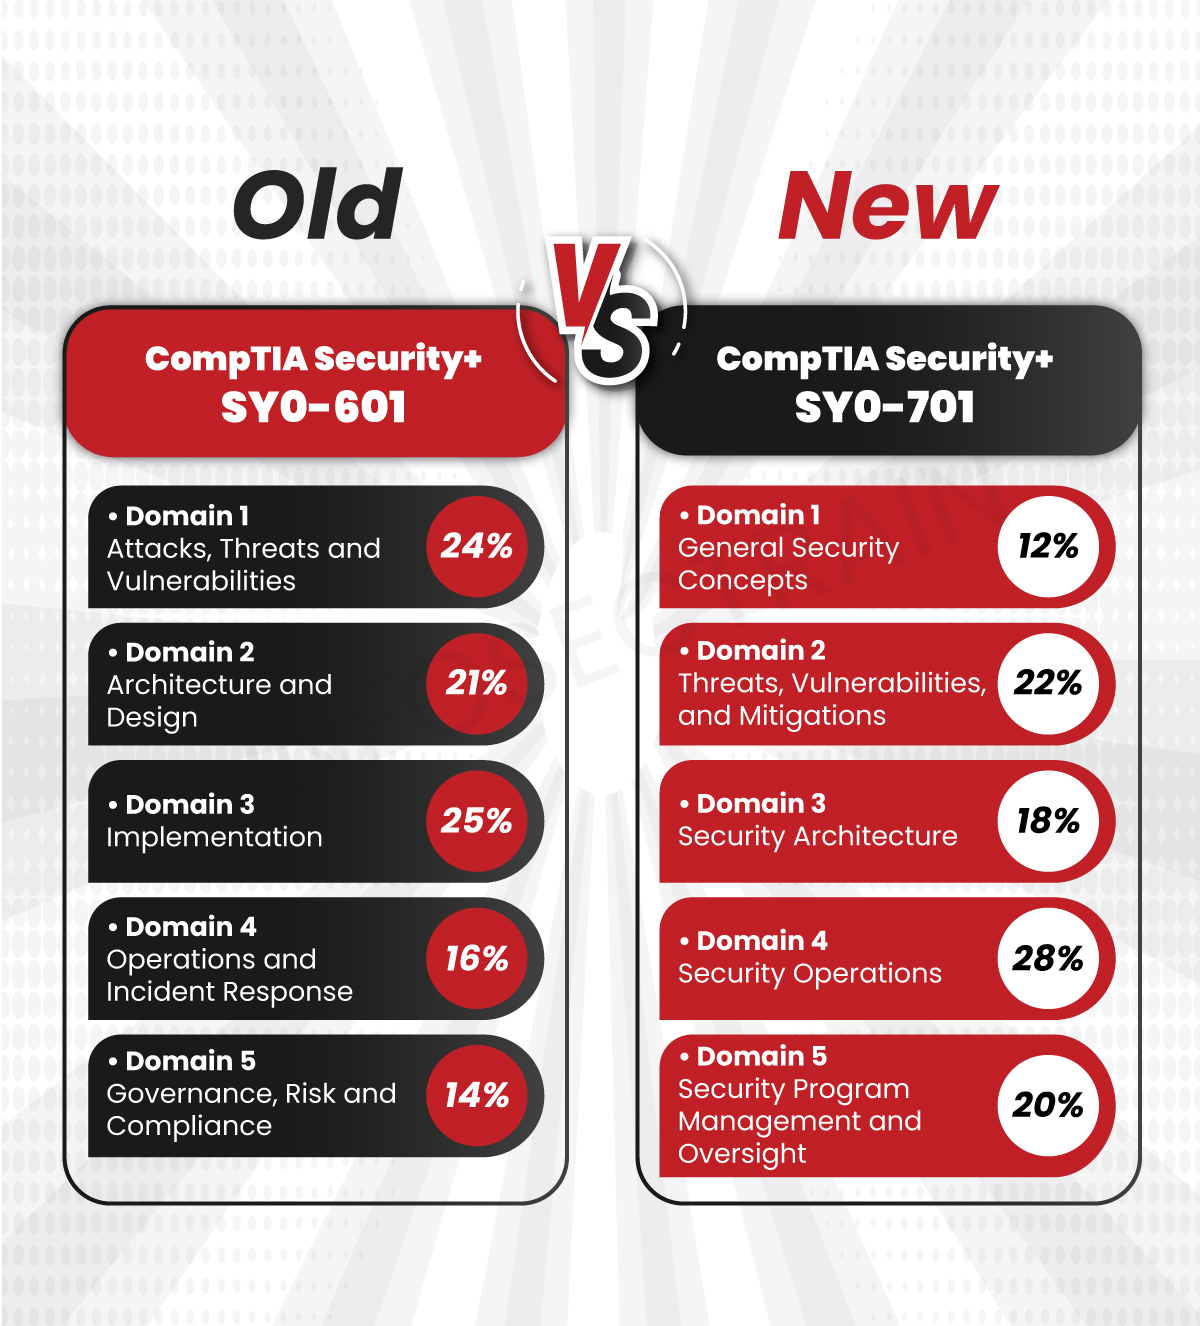 Old vs. New CompTIA Security+ SY0-701 Domains